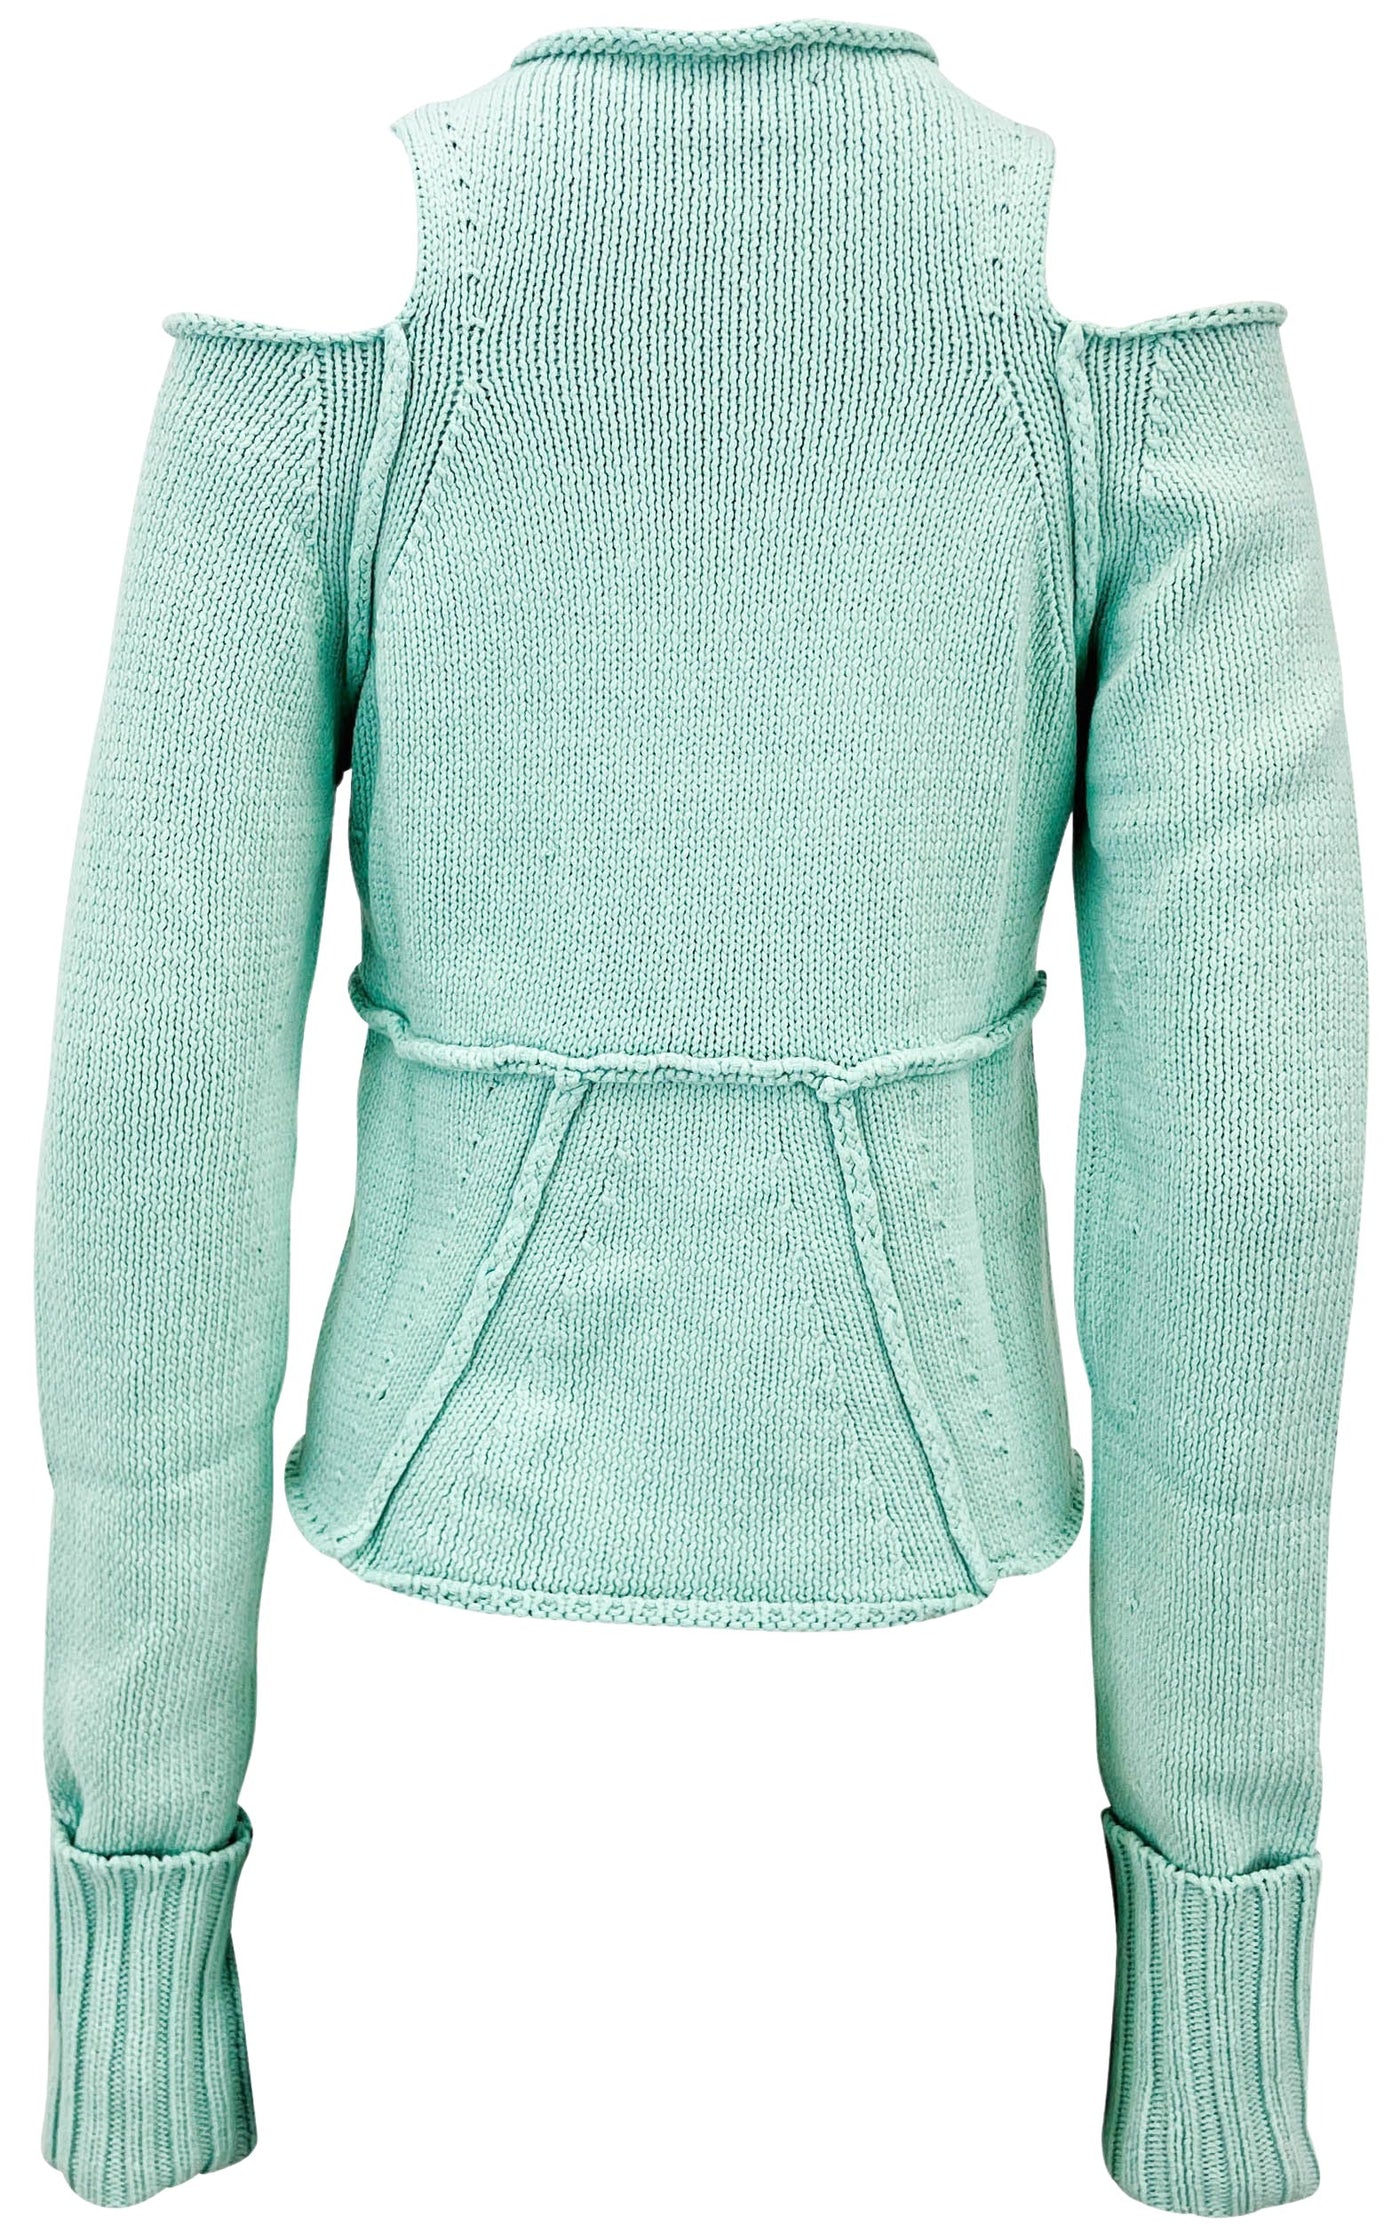 Aisling Camps Collarbone Sweater in Mint - Discounts on Aisling Camps at UAL